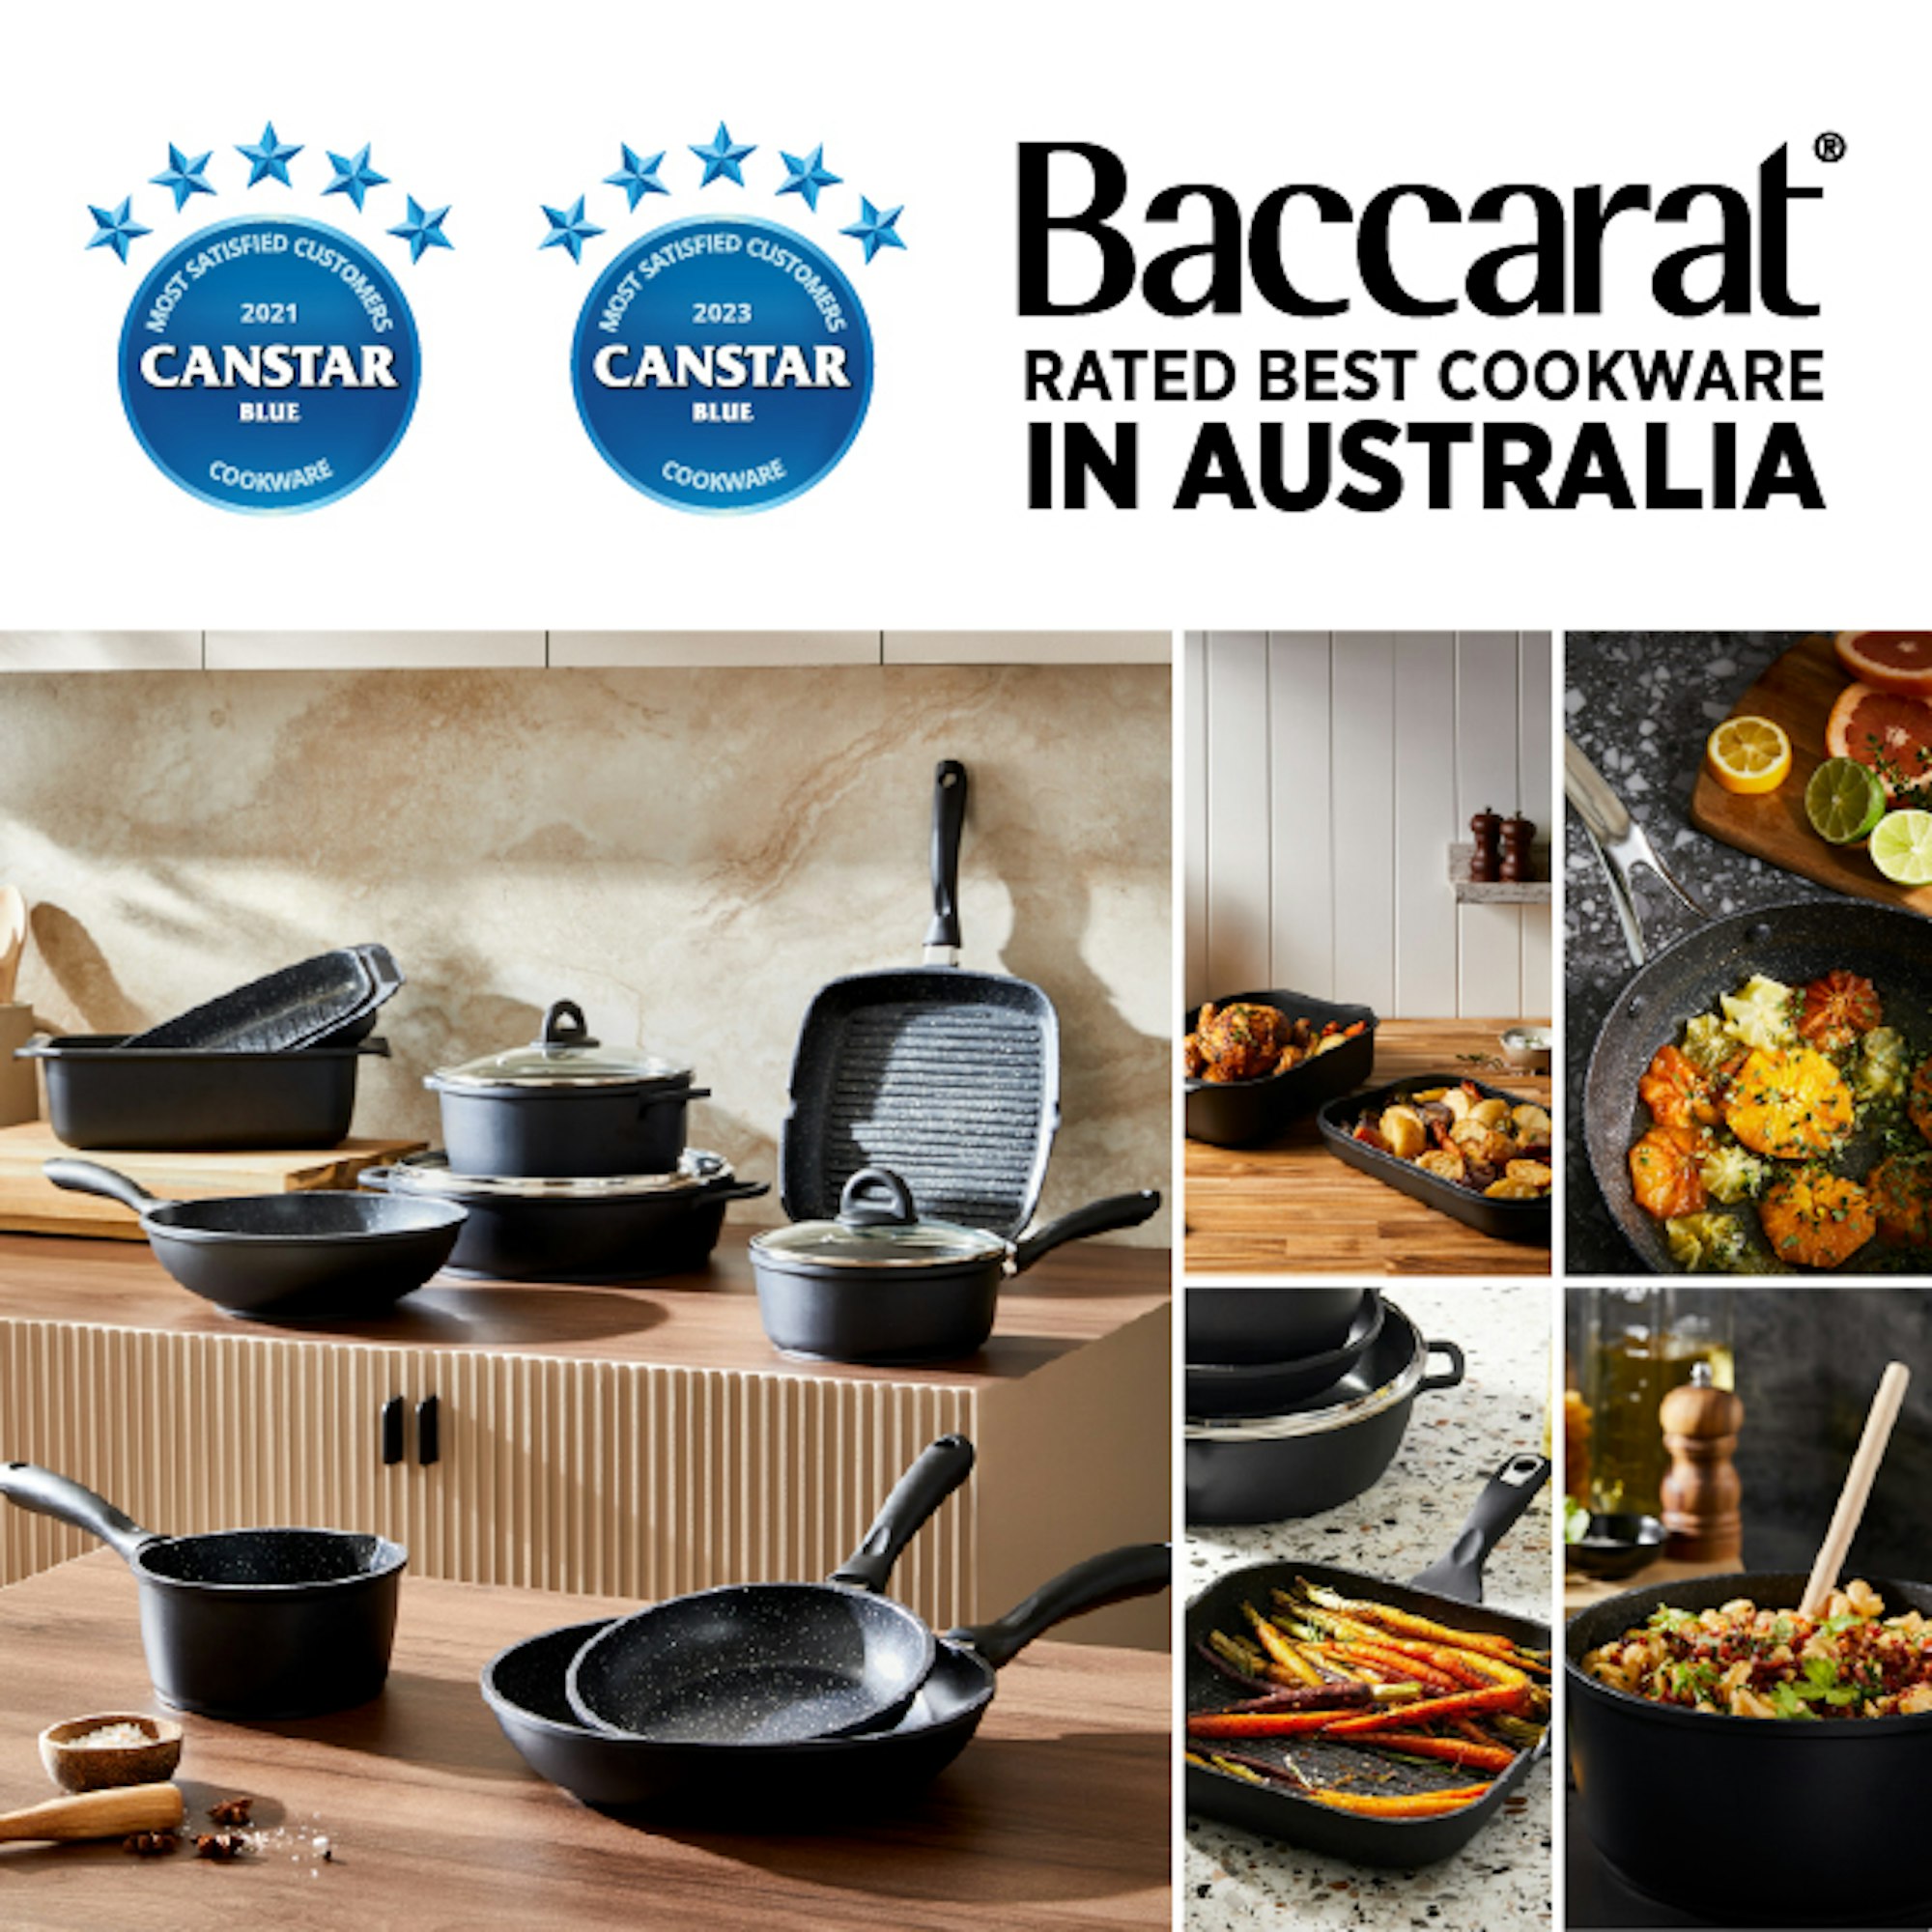 Baccarat - Best Rated Cookware in Australia